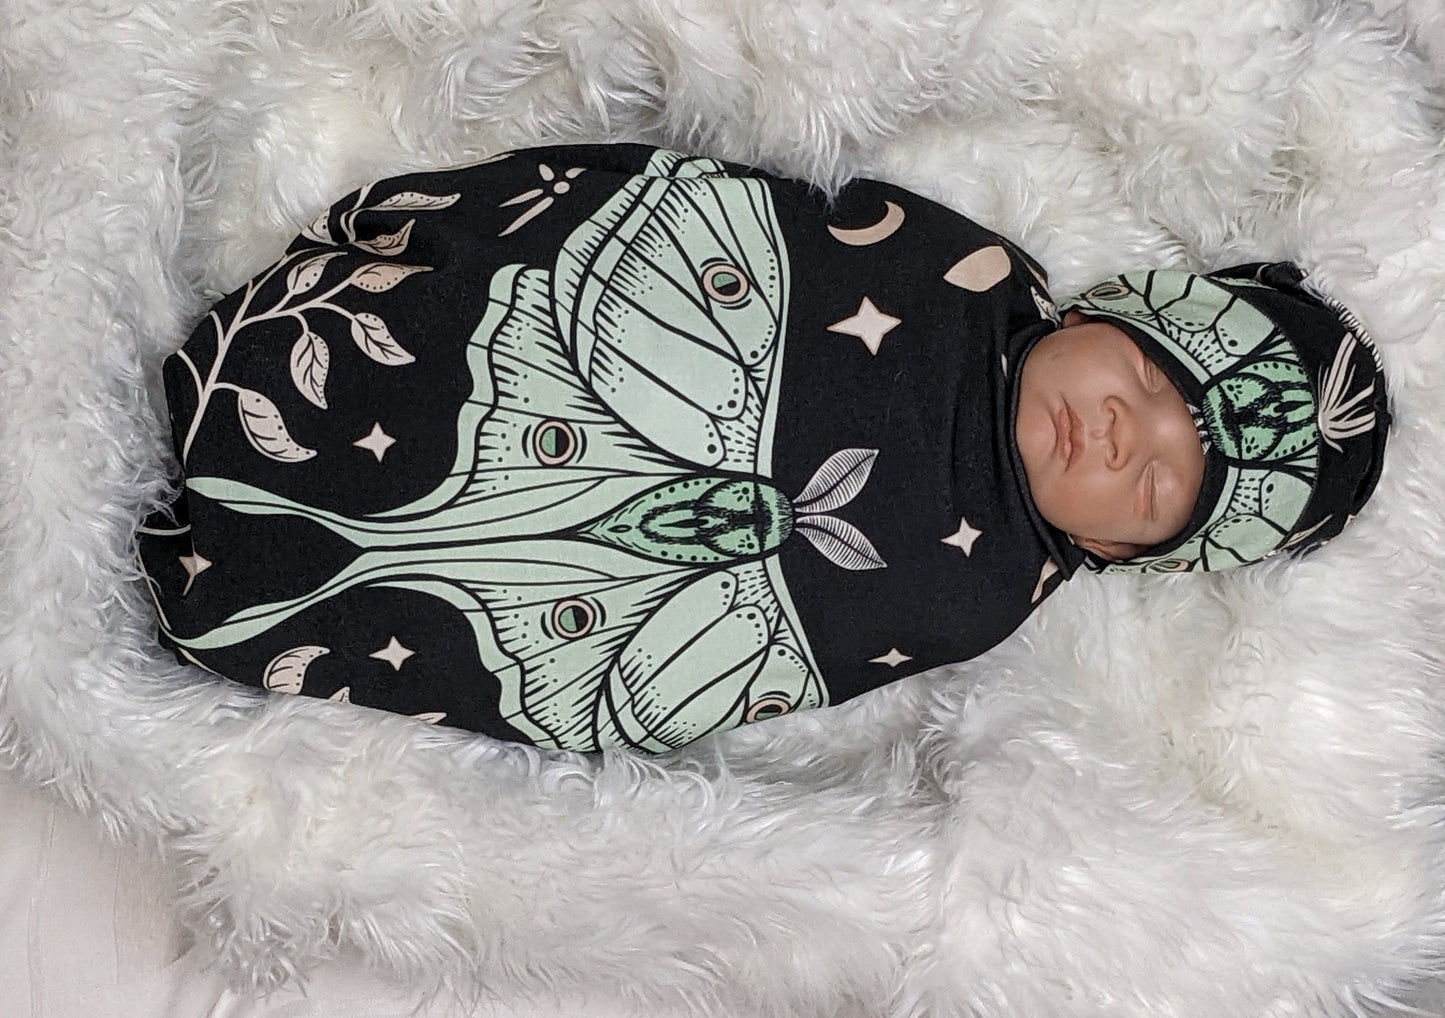 Moon Moth Swaddle Blanket Set + Bow Band or Hat,Mystical Witchy Baby Stuff,Gothic Newborn Clothing for Celestial Moon Baby Hospital Outfit